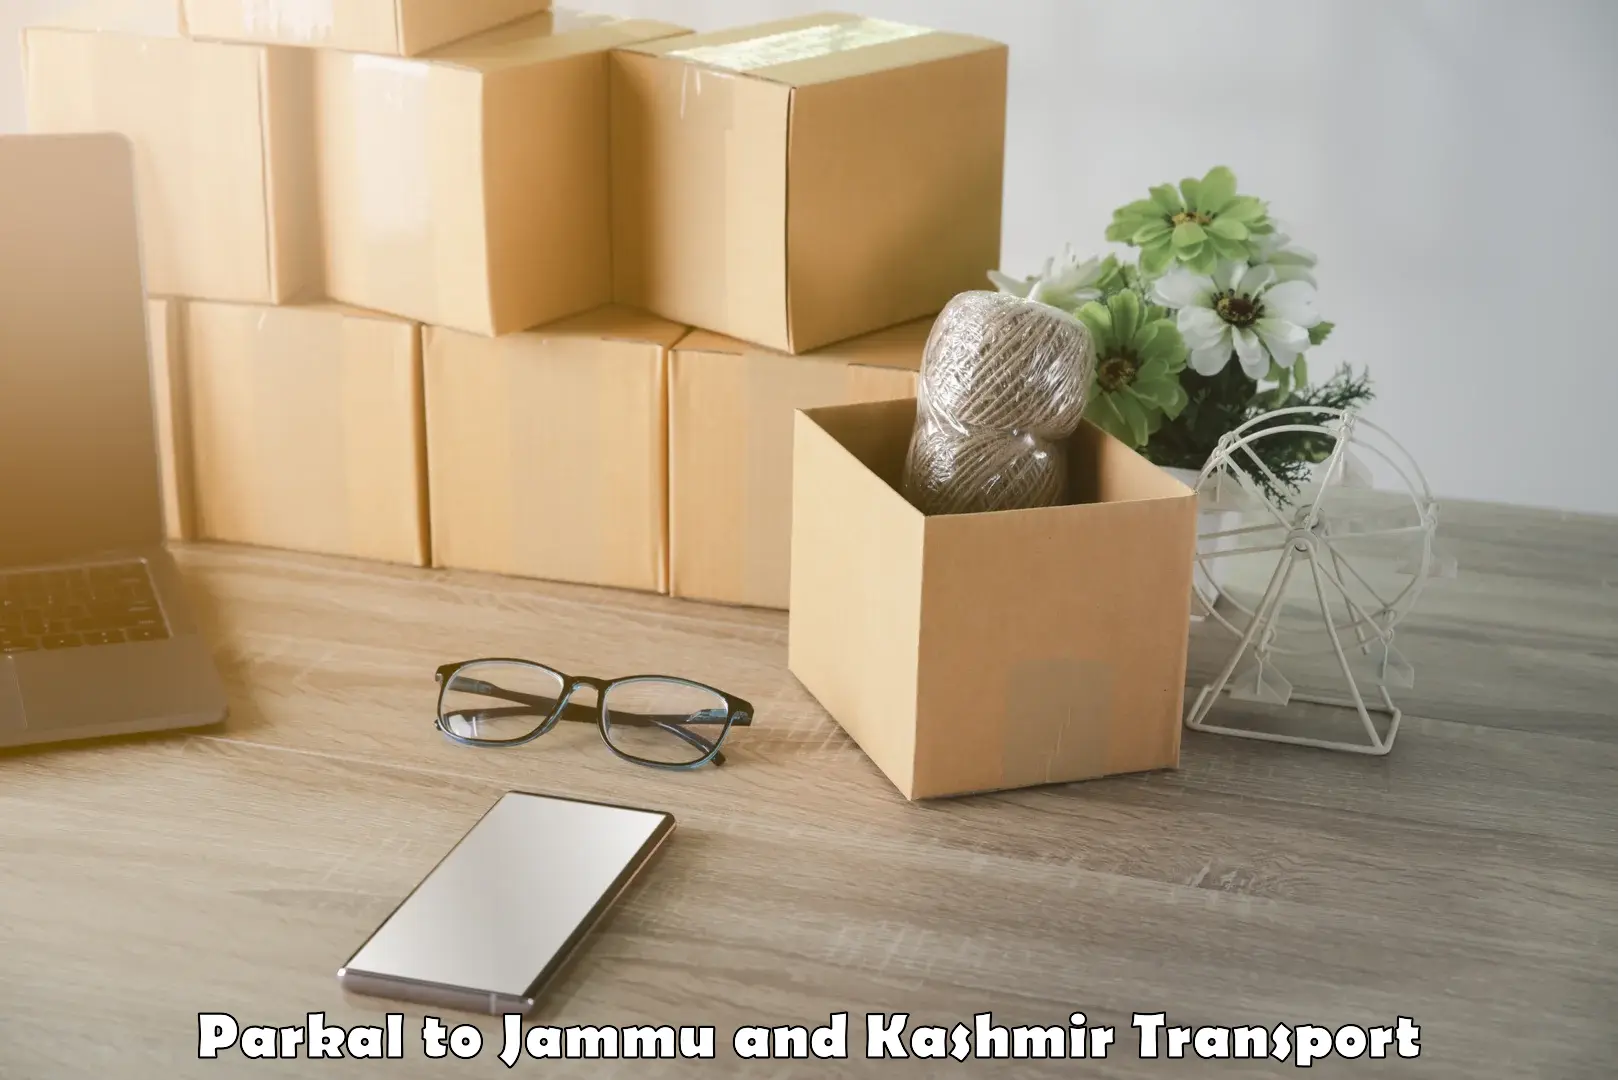 Truck transport companies in India Parkal to Baramulla